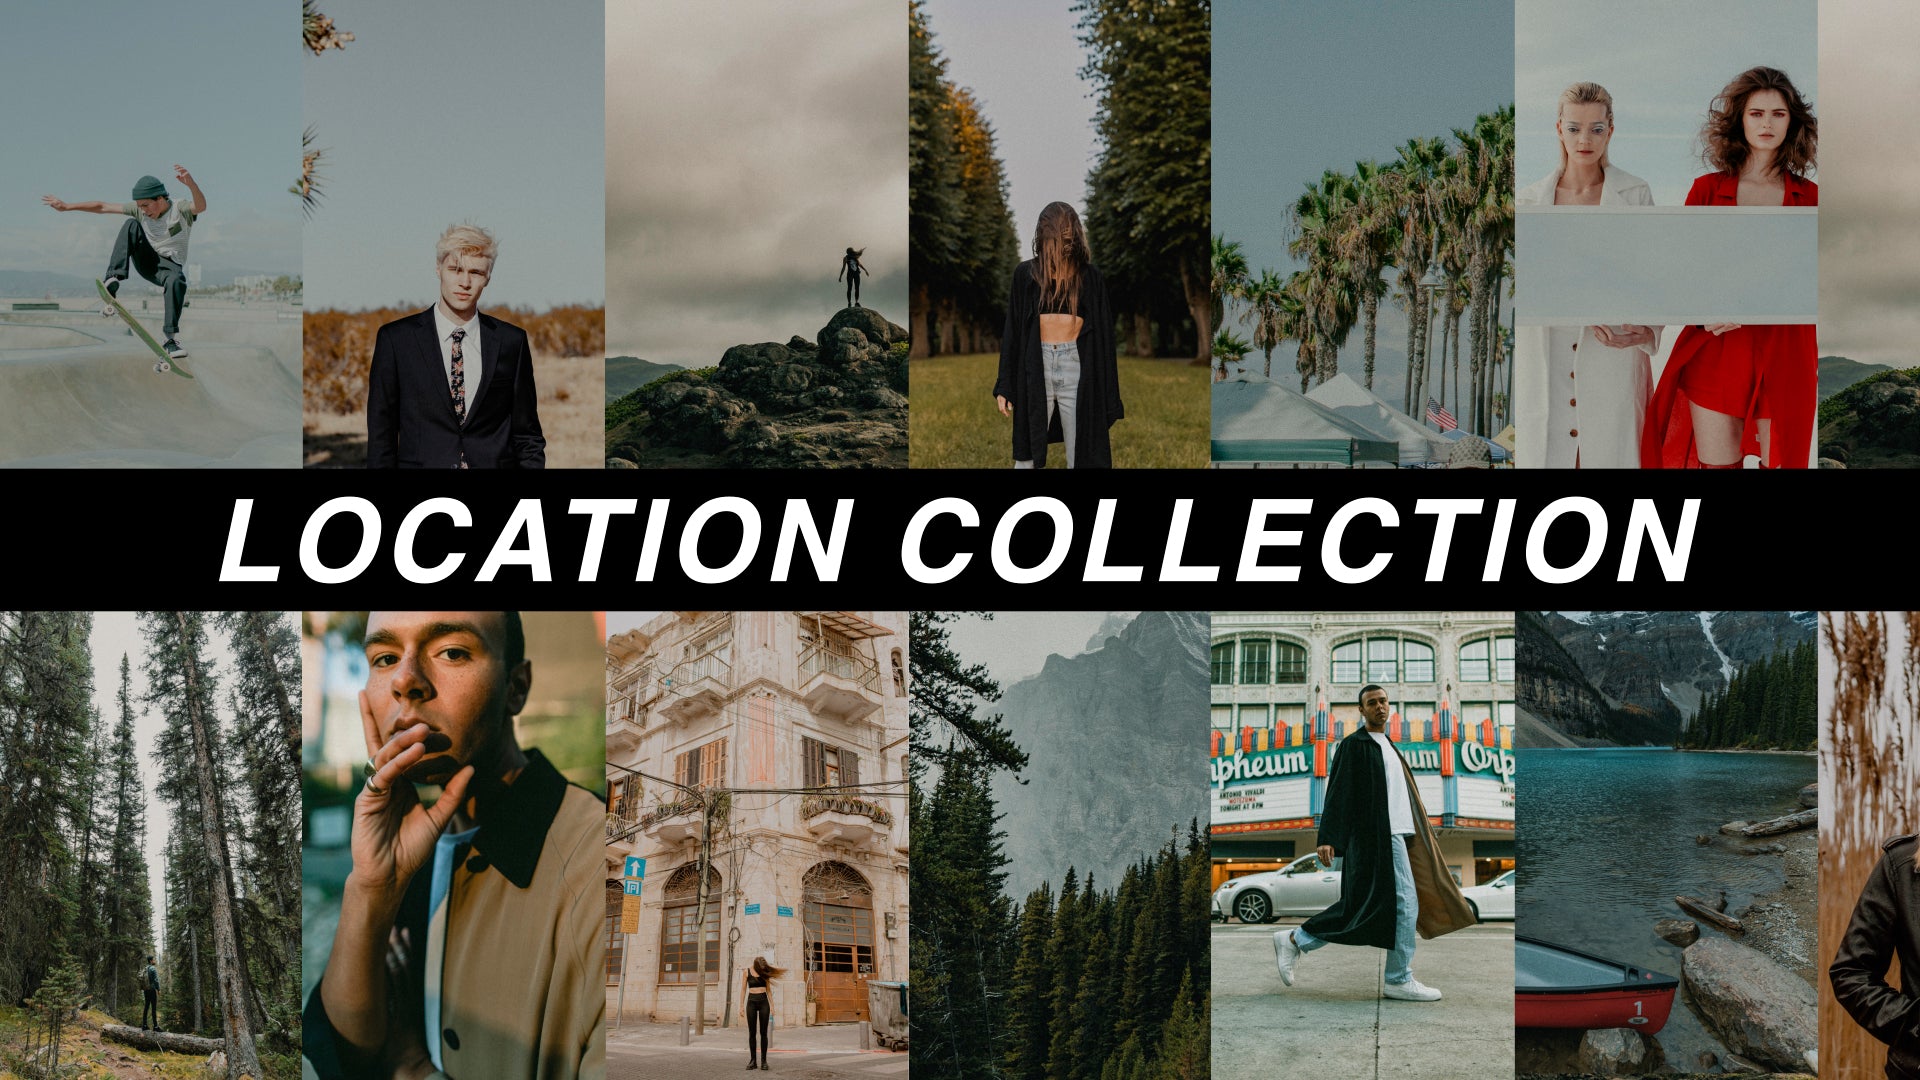 The Location Collection